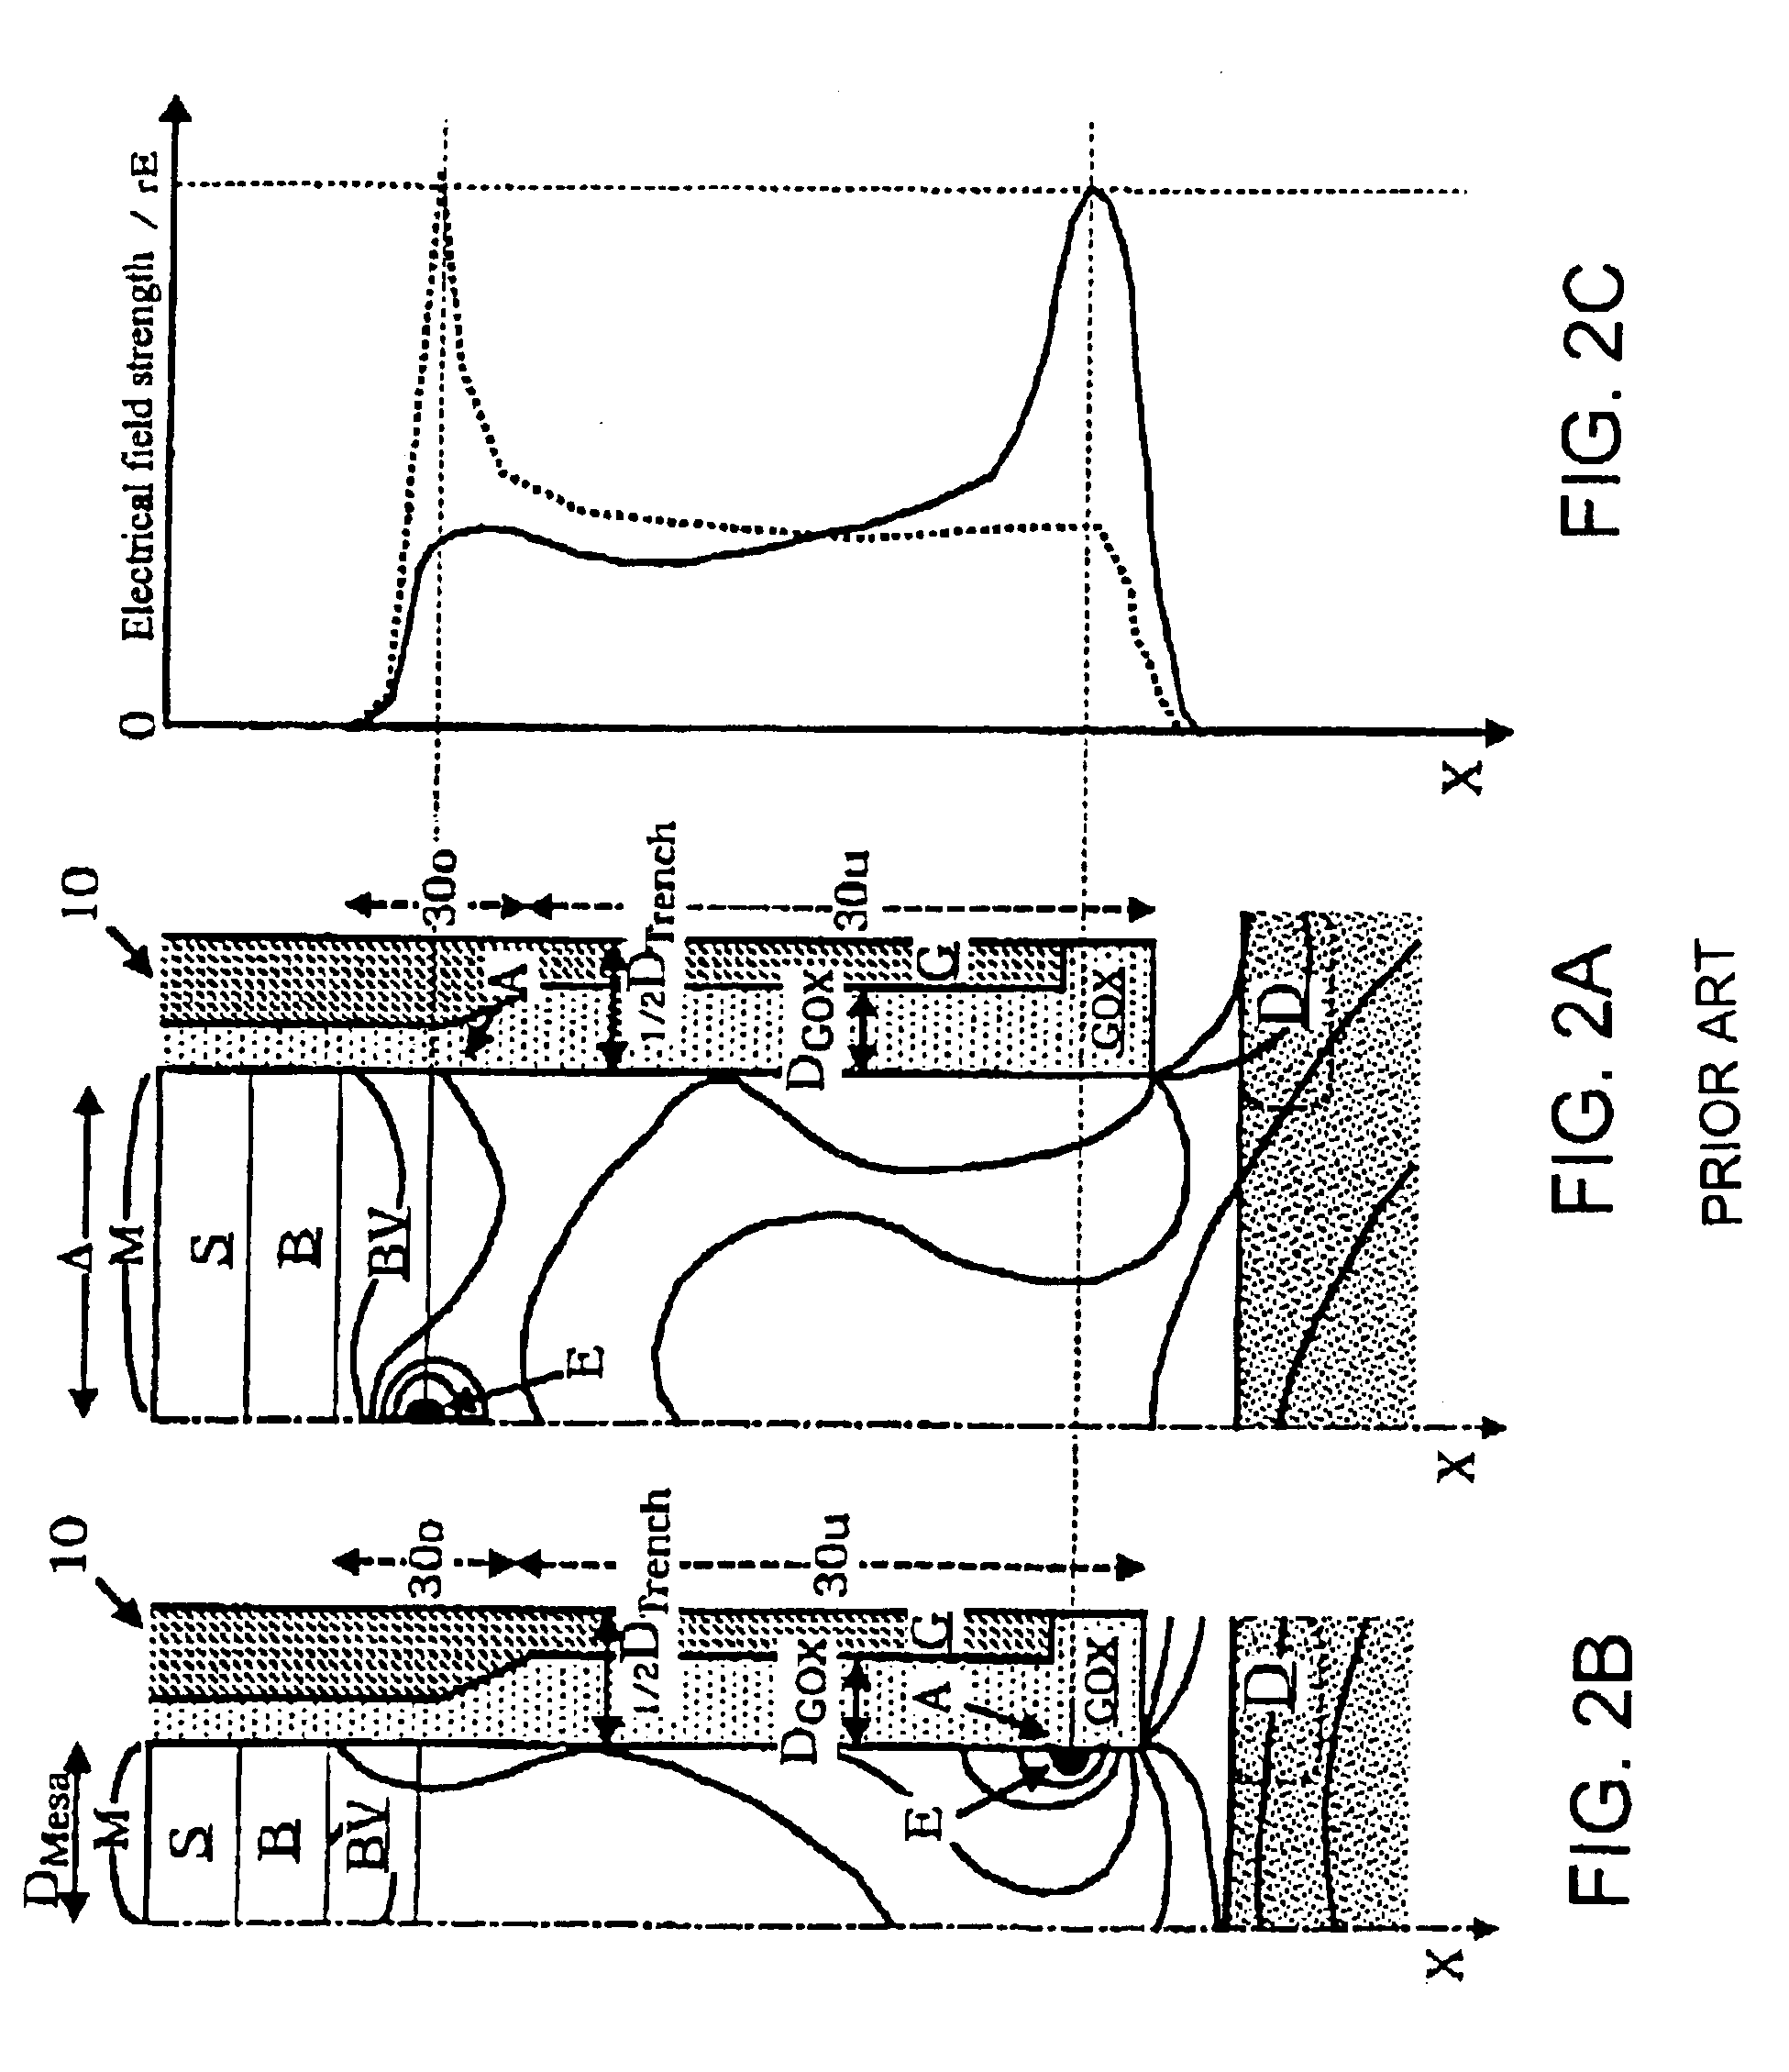 MOS transistor device with a locally maximum concentration region between the source region and the drain region